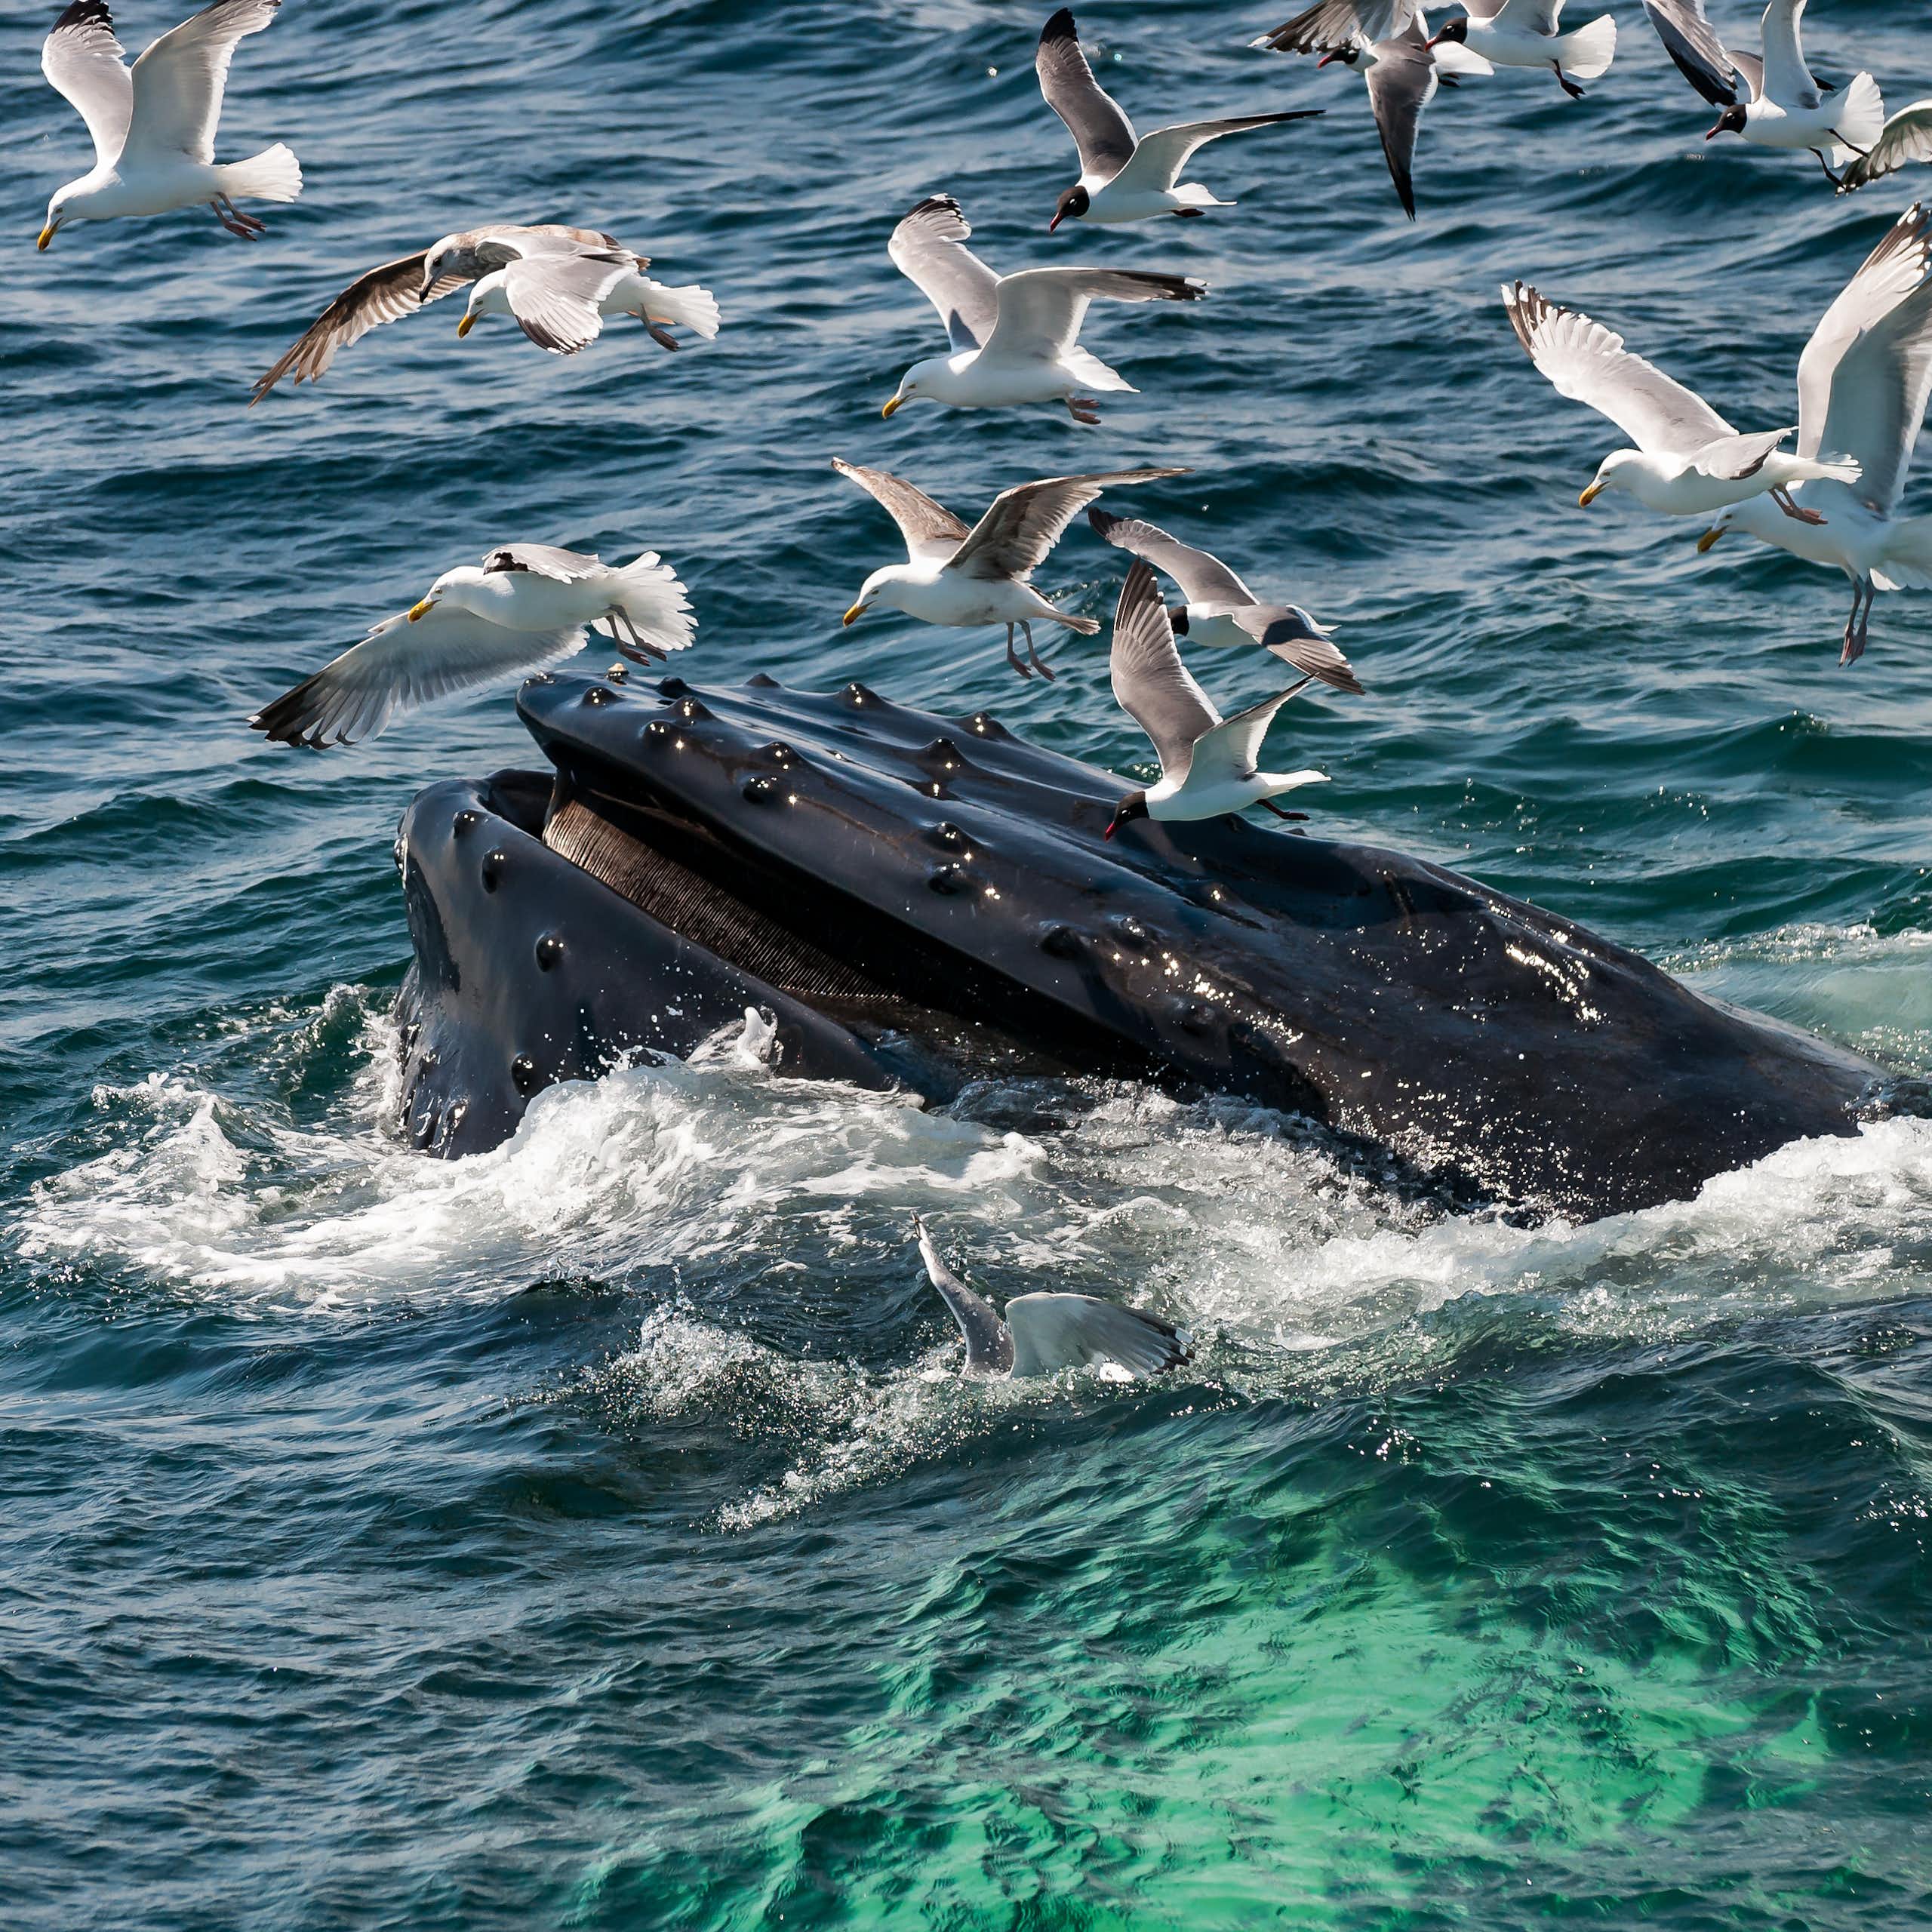 A humpback whale emerging from the sea surrounded by gulls.